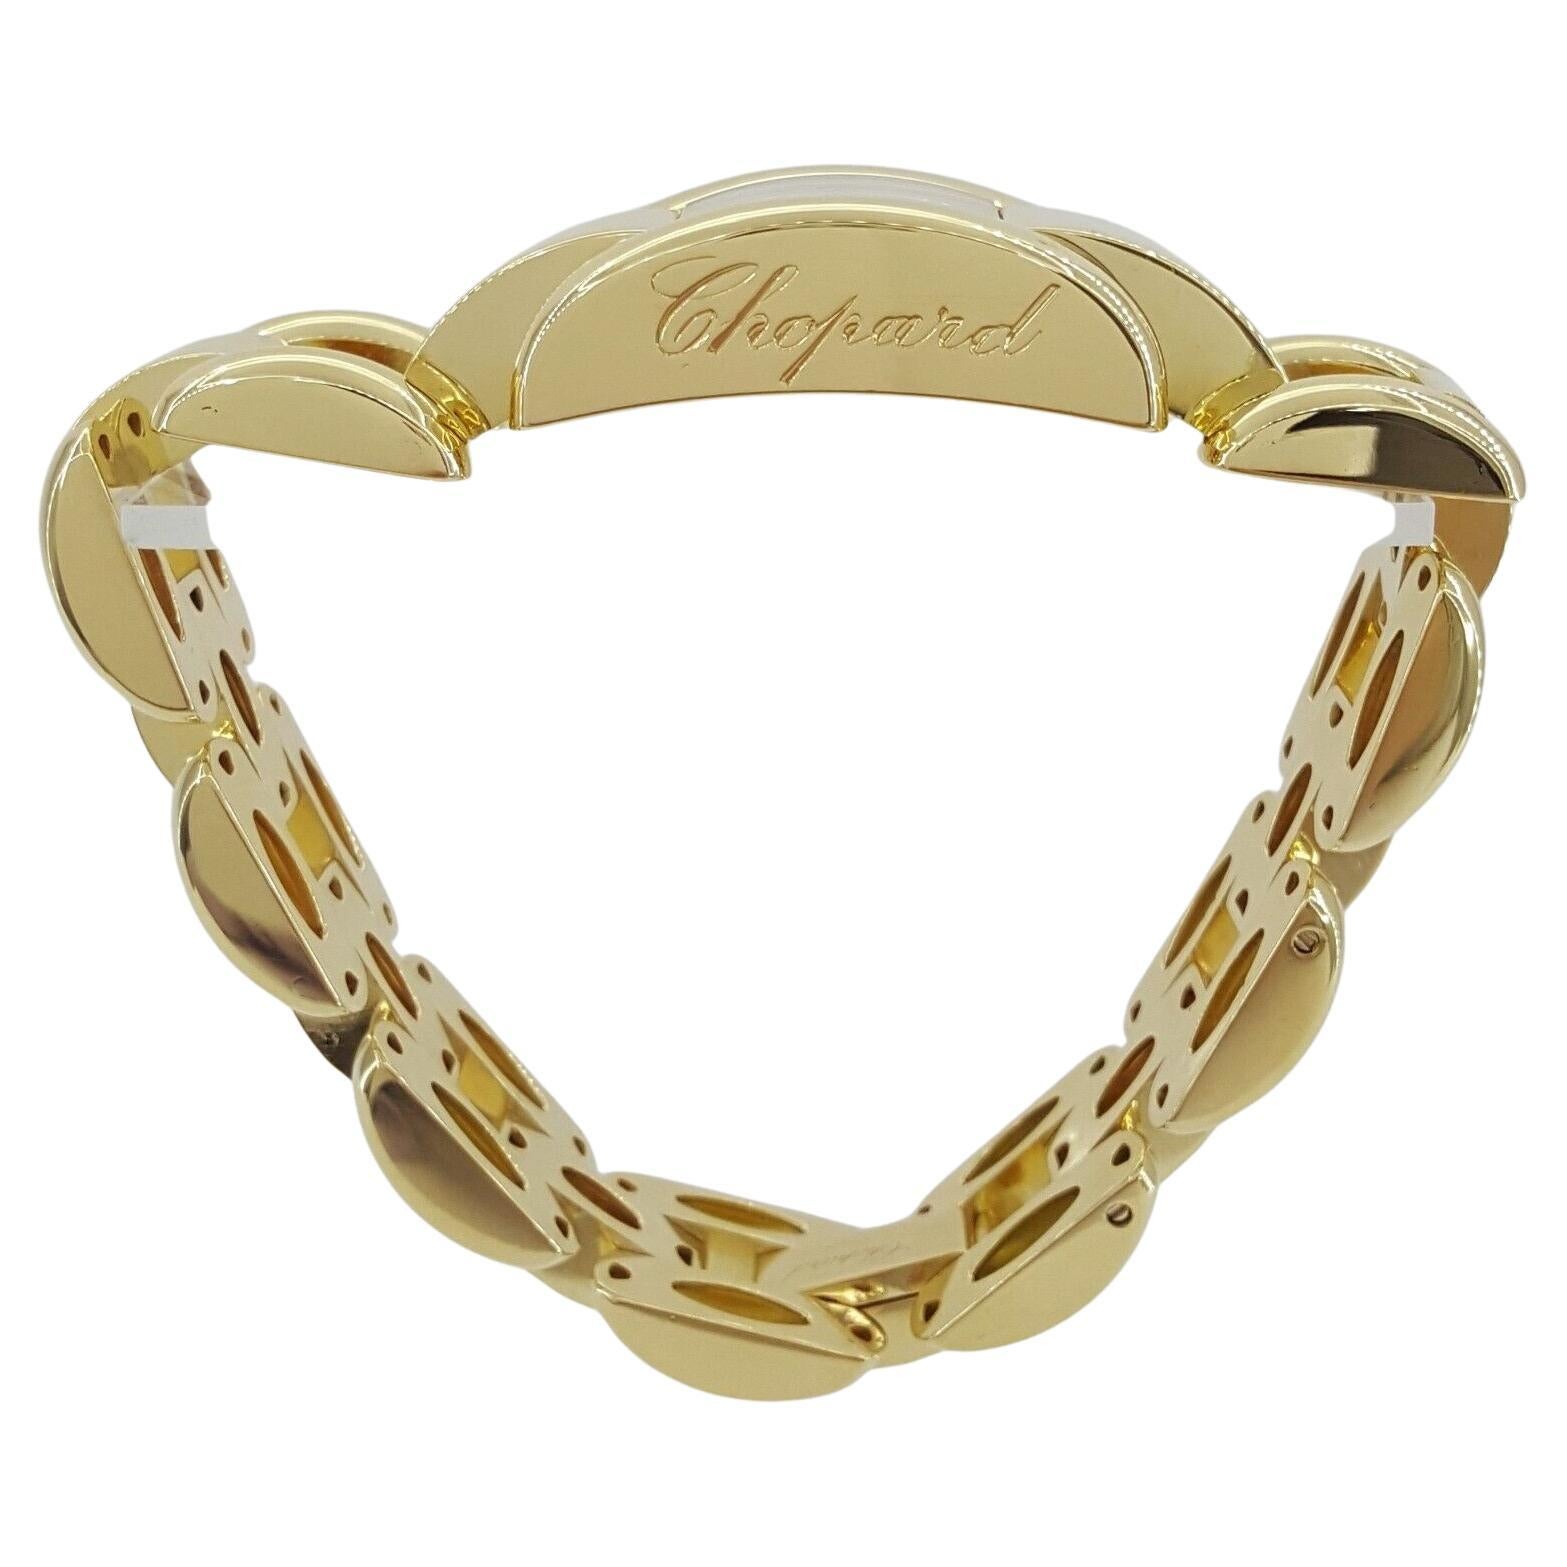 Modern Chopard Watch Crafted in luxurious 18K gold For Sale